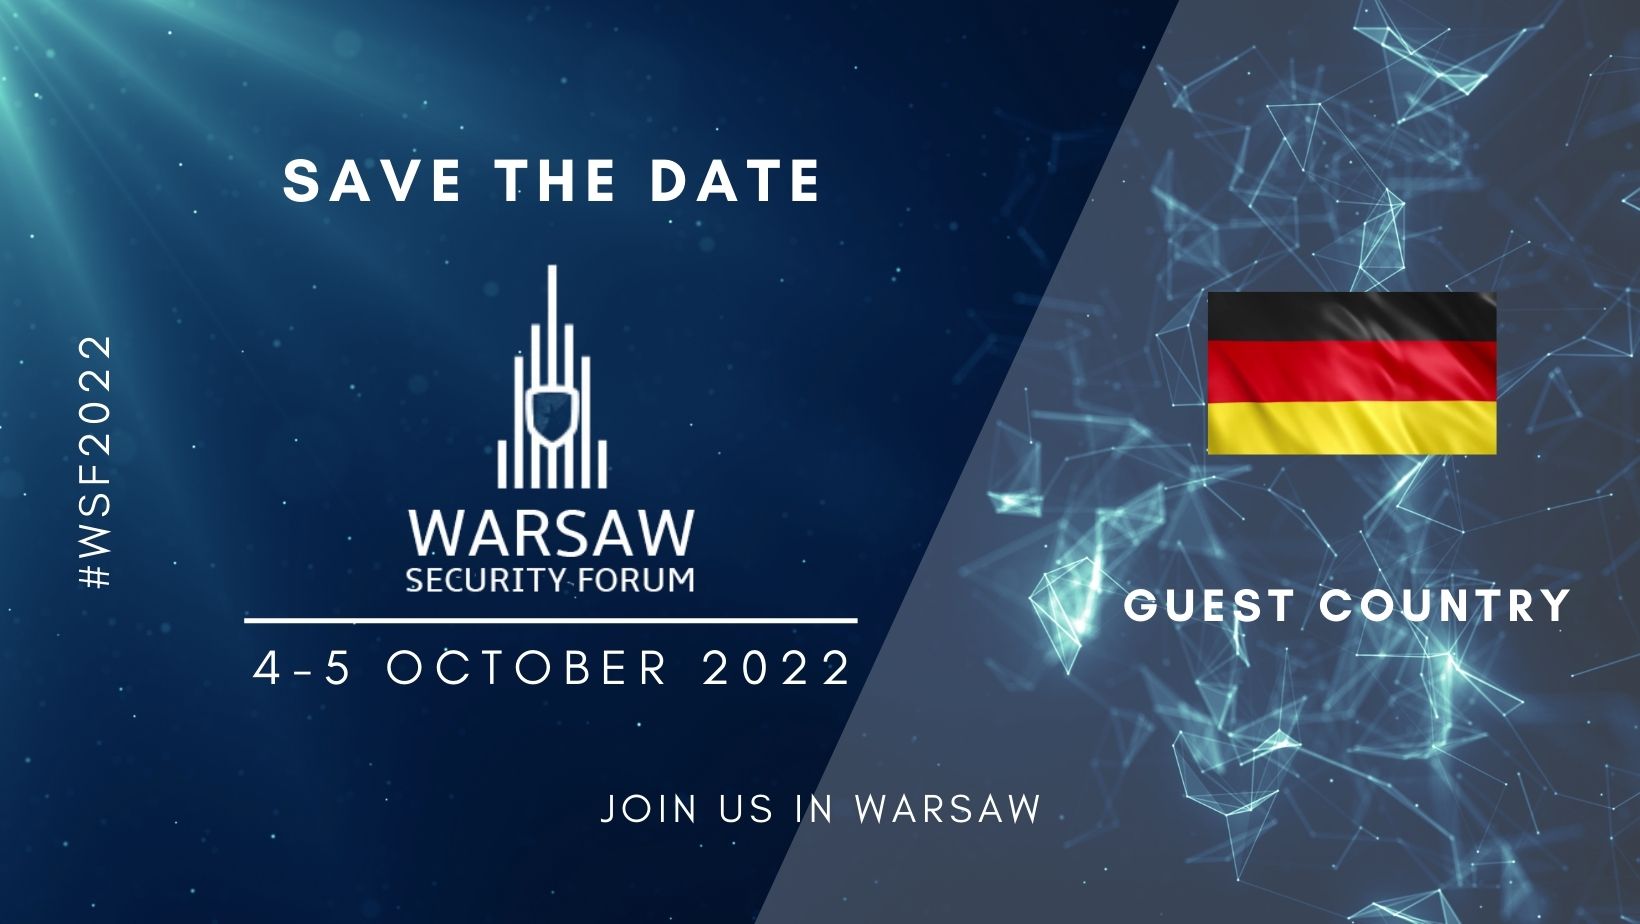 Warsaw Security Forum in 2022 – save the date!